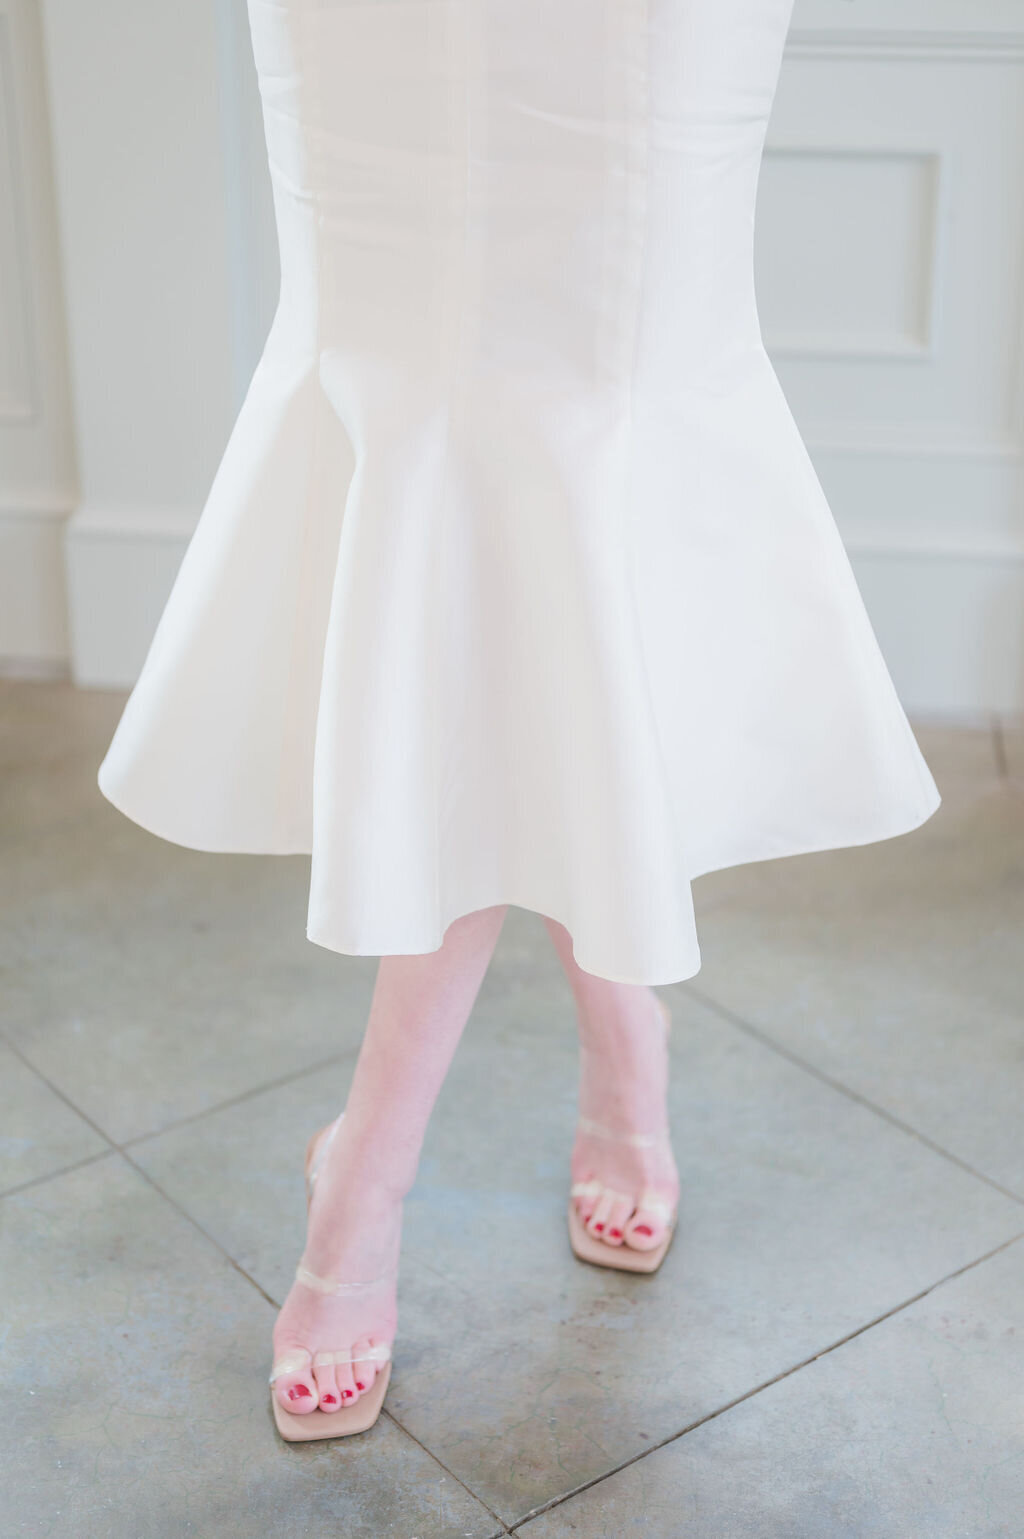 The Lana bridal style is a mikado wedding dress in a midi-length fit-and-flare silhouette by indie designer Edith Elan.